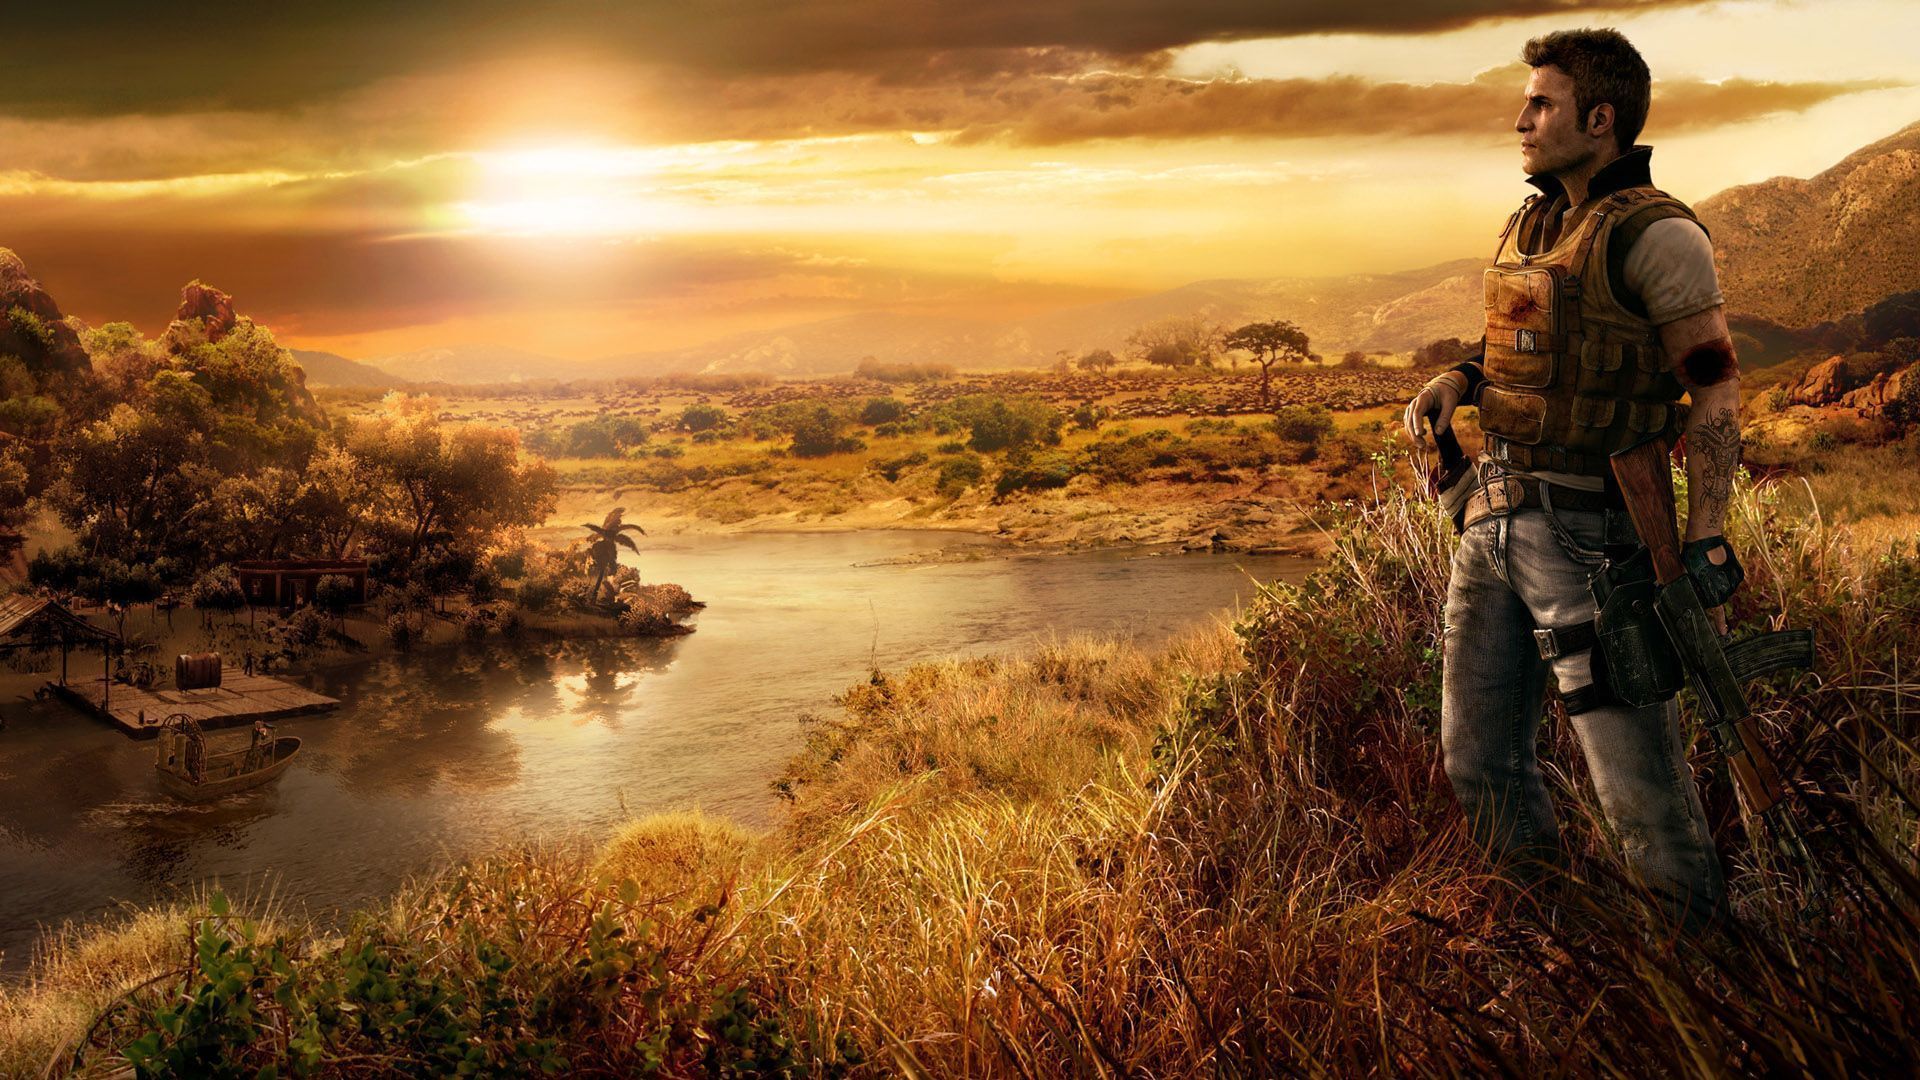 Far Cry 2 PC game wallpapers and images - wallpapers, pictures, photos